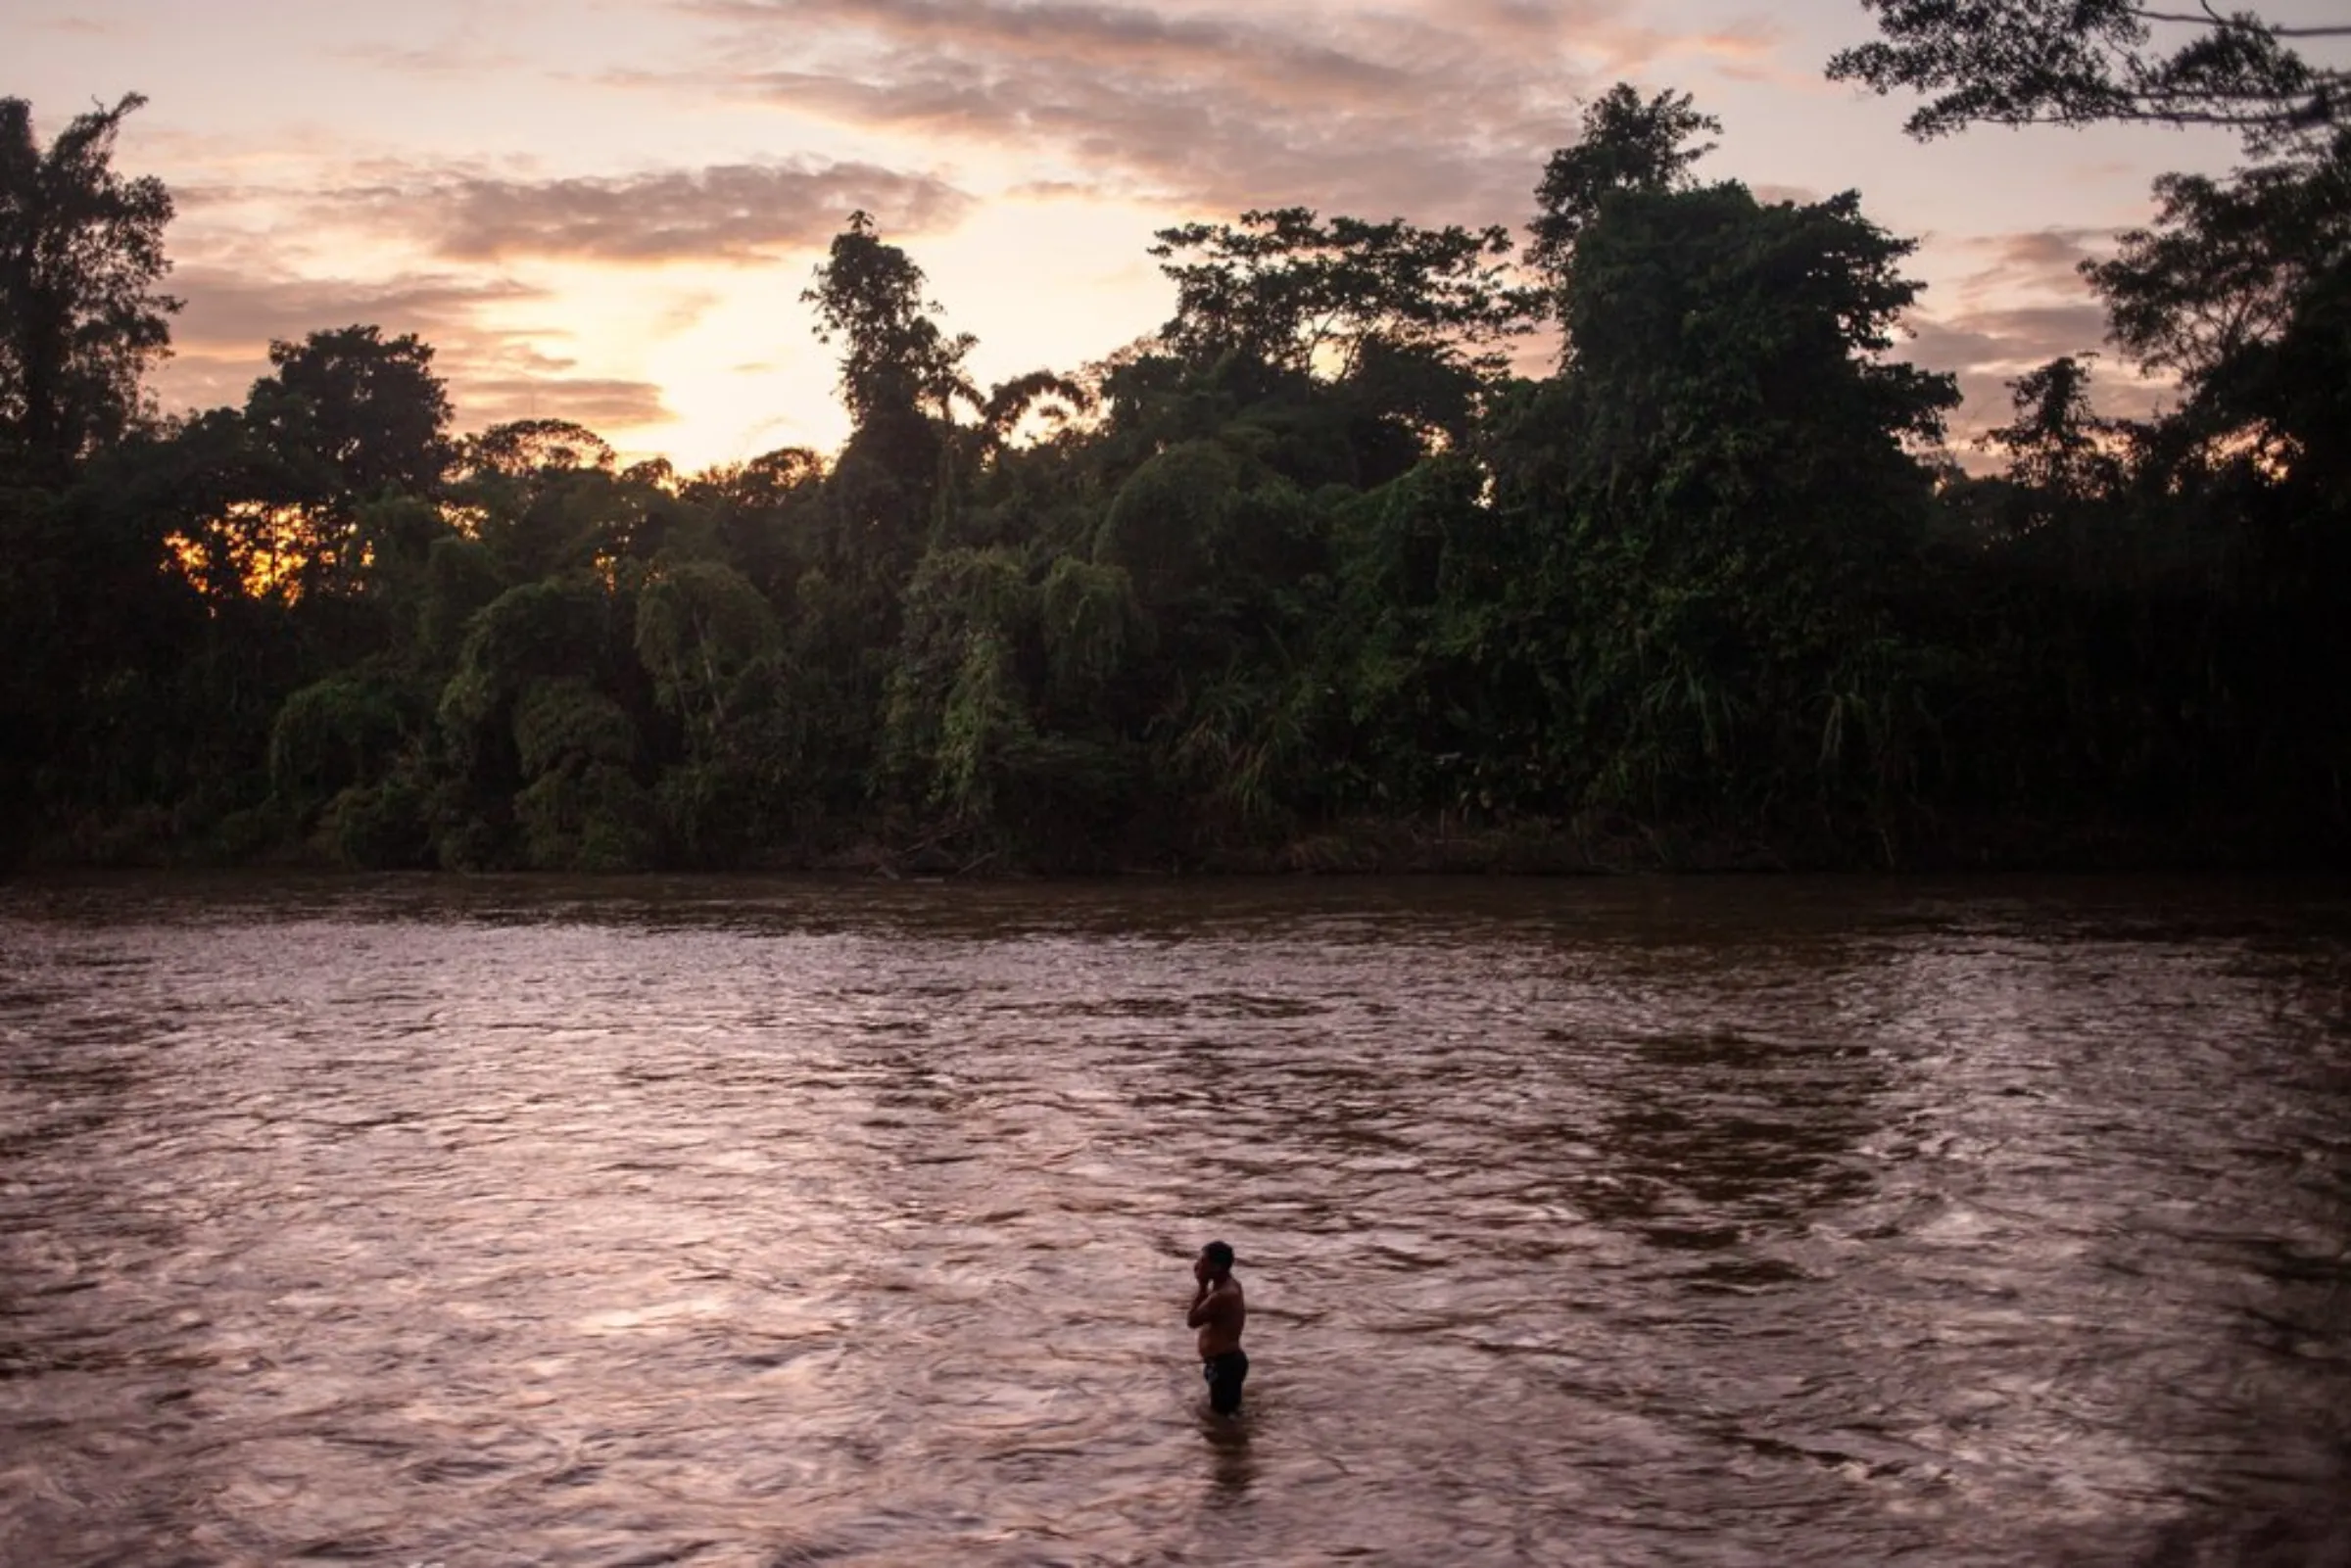 A man from the Waorani of Pastaza indigenous group bathes in the Curaray River at sunset in the Amazon province of Pastaza, Ecuador, on April 25, 2022